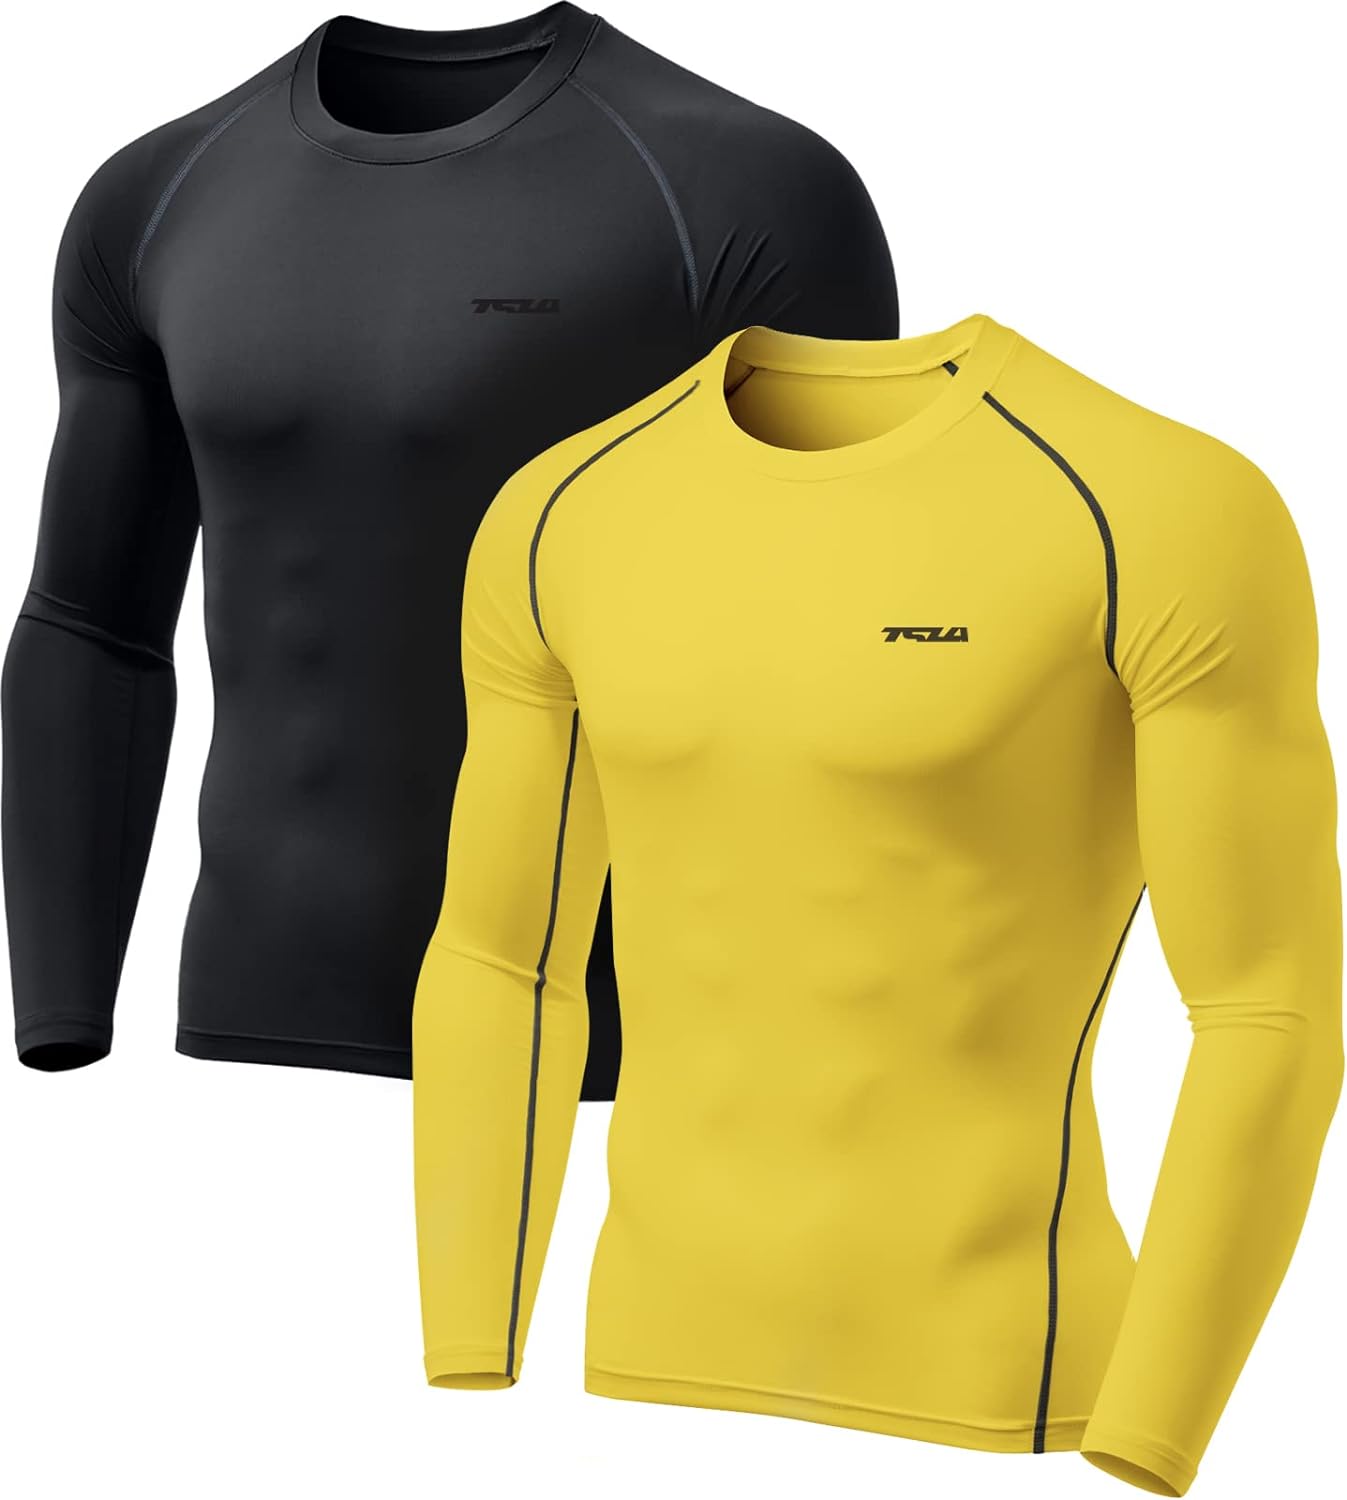  One Sleeve Compression Shirts for Men Athletic Base